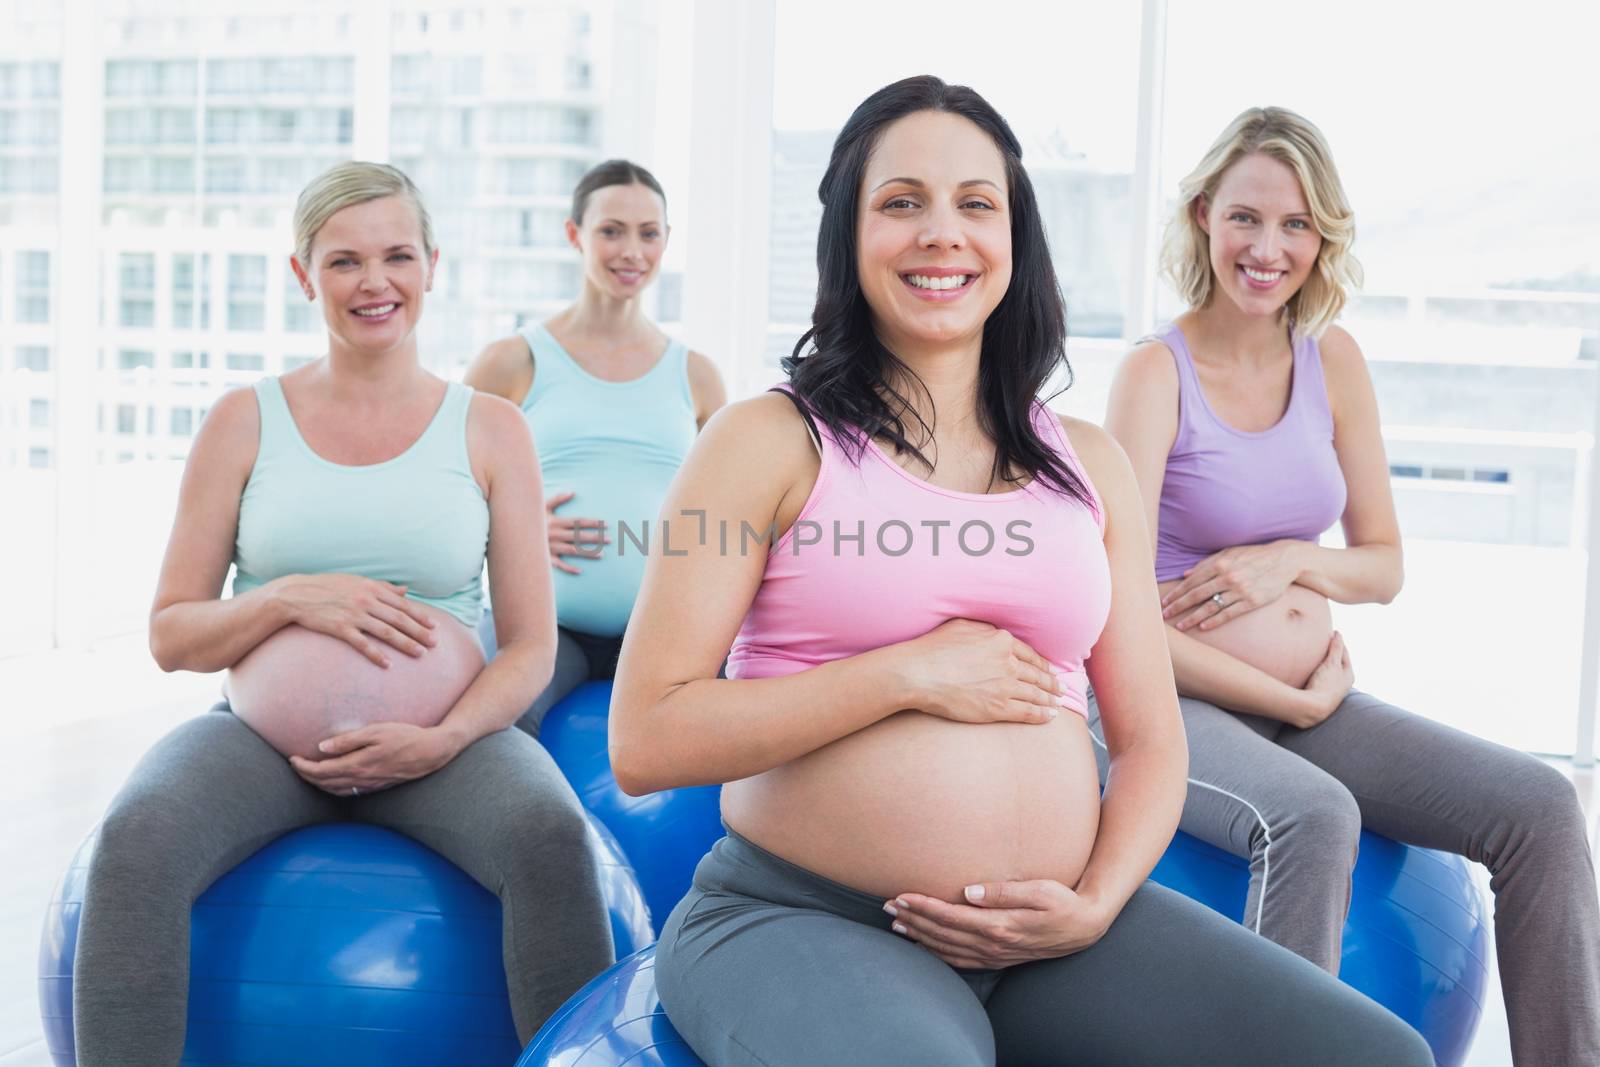 Smiling pregnant women sitting on exercise balls  in a fitness studio